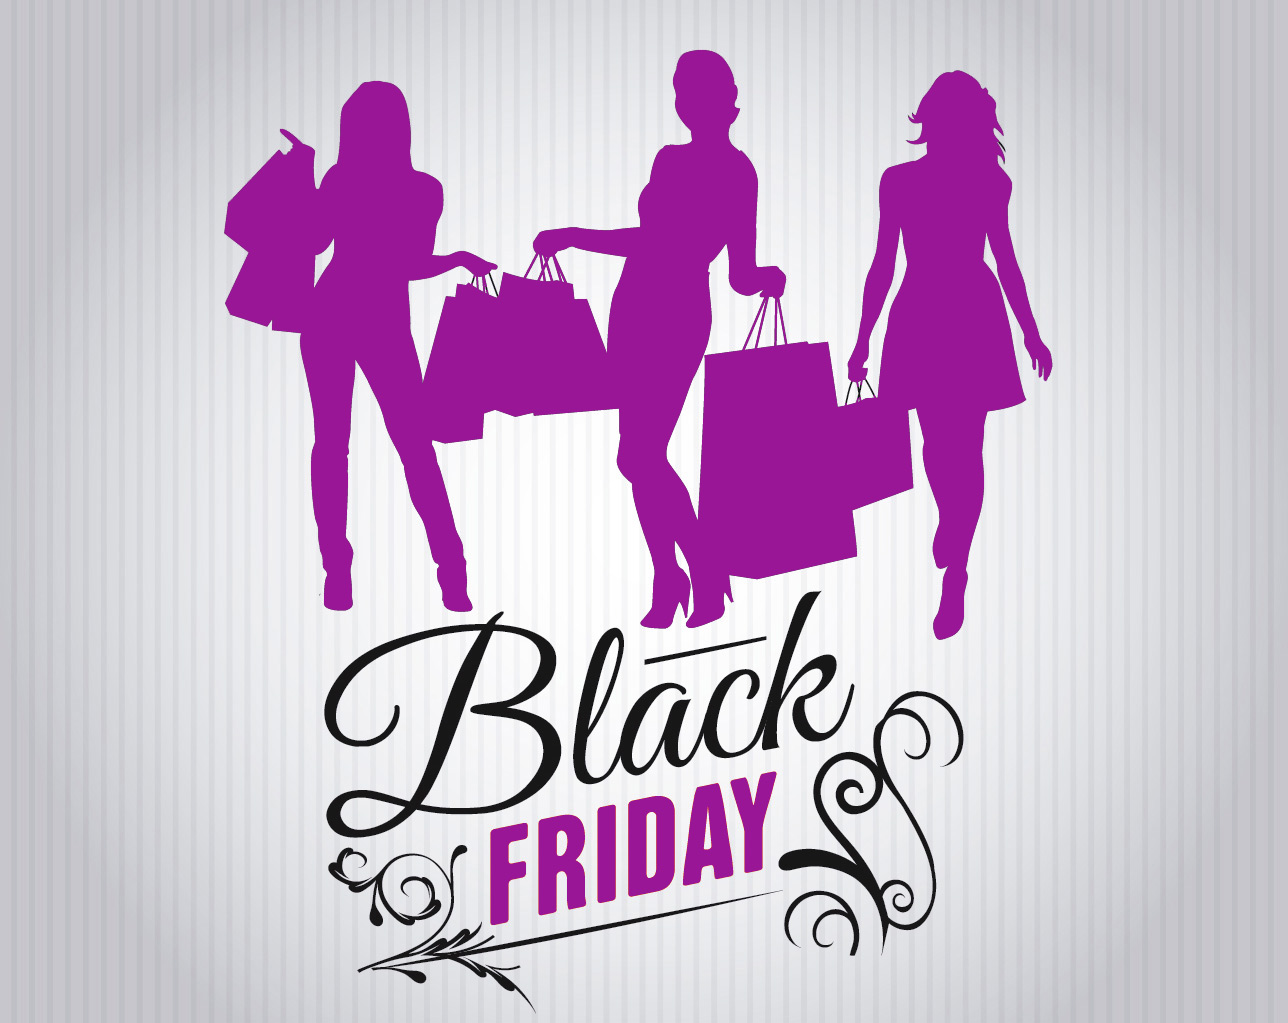 Black Friday 2015 - Img by www.vectoropenstock.com (article page for credits)